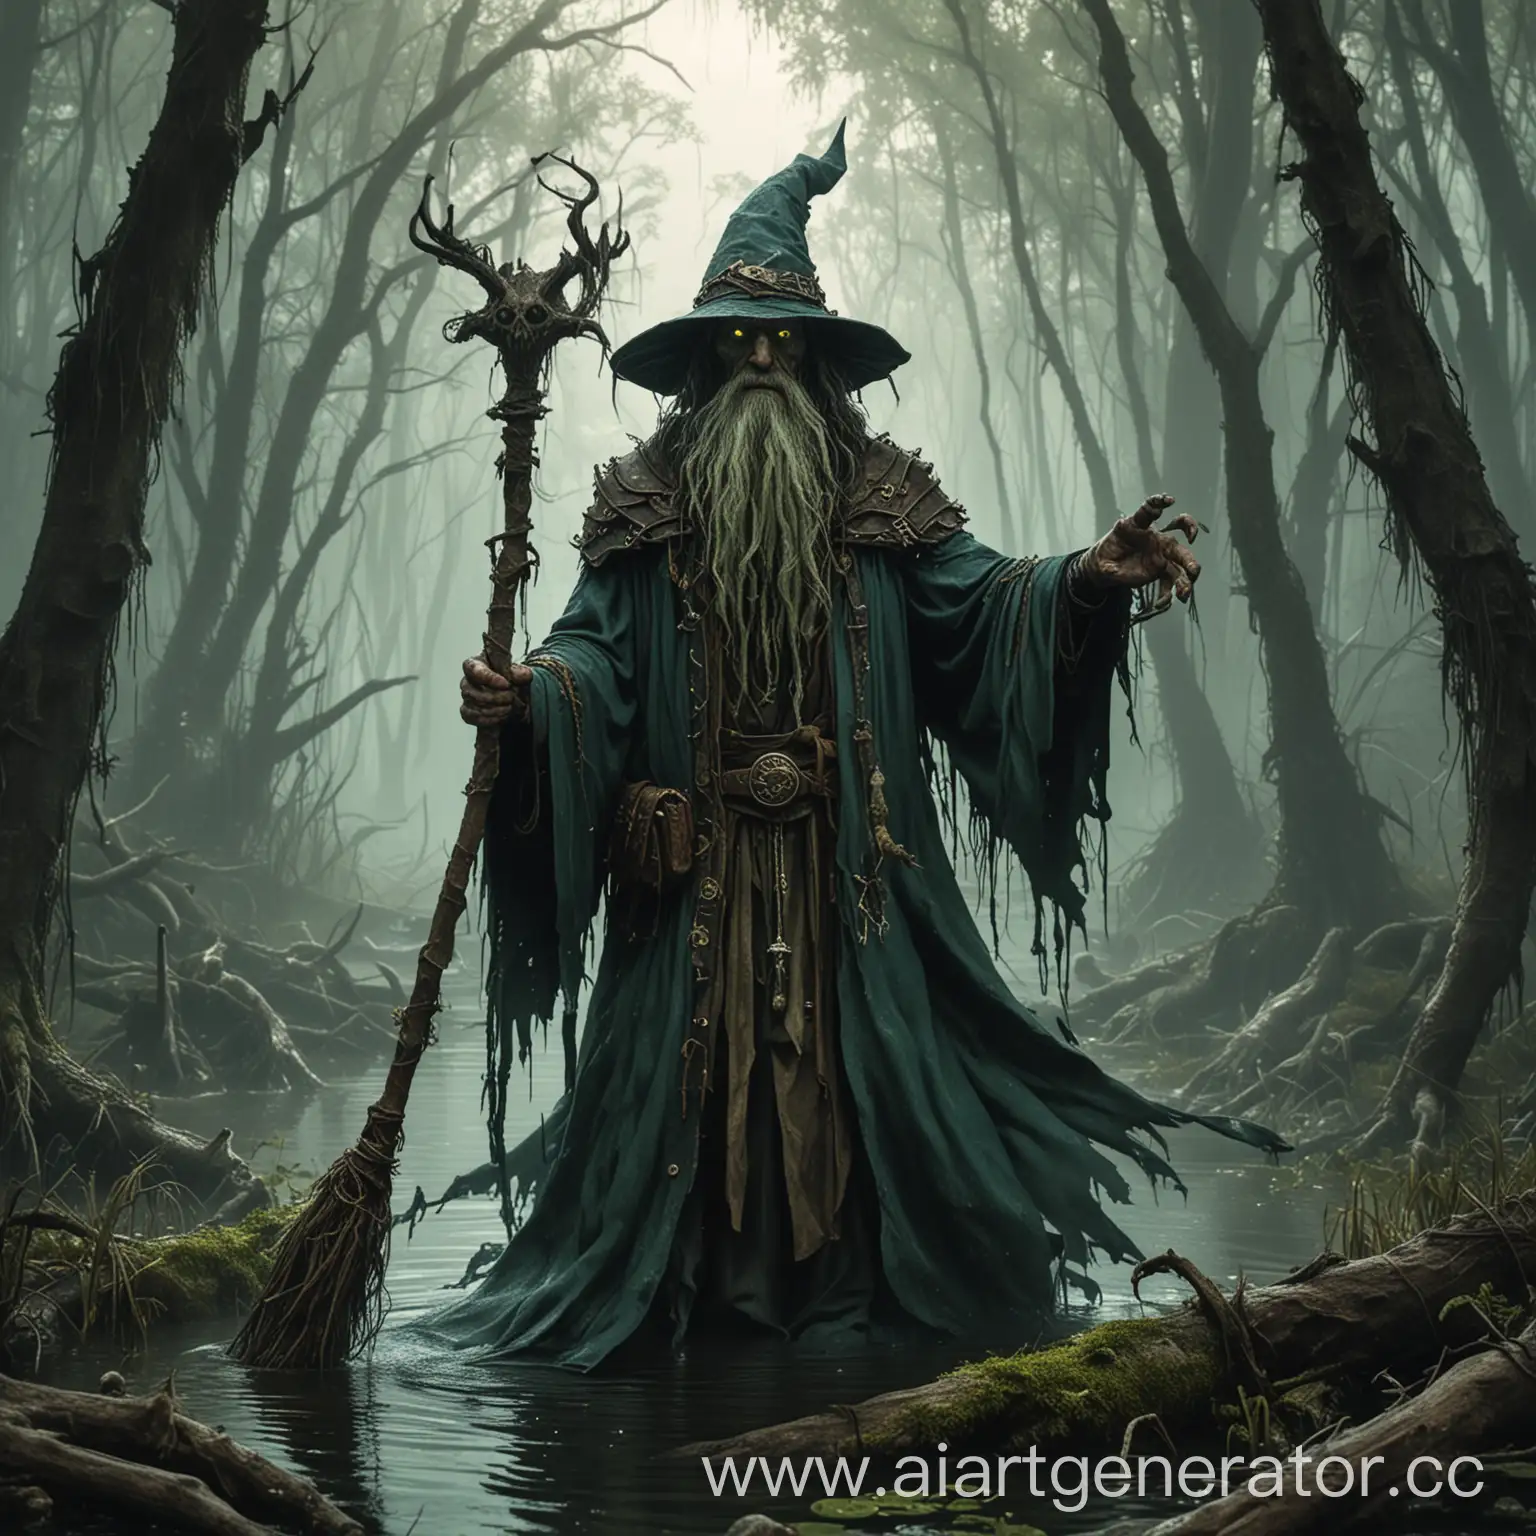 Mysterious-Swamp-Wizard-Meeting-a-Stranger-Lord